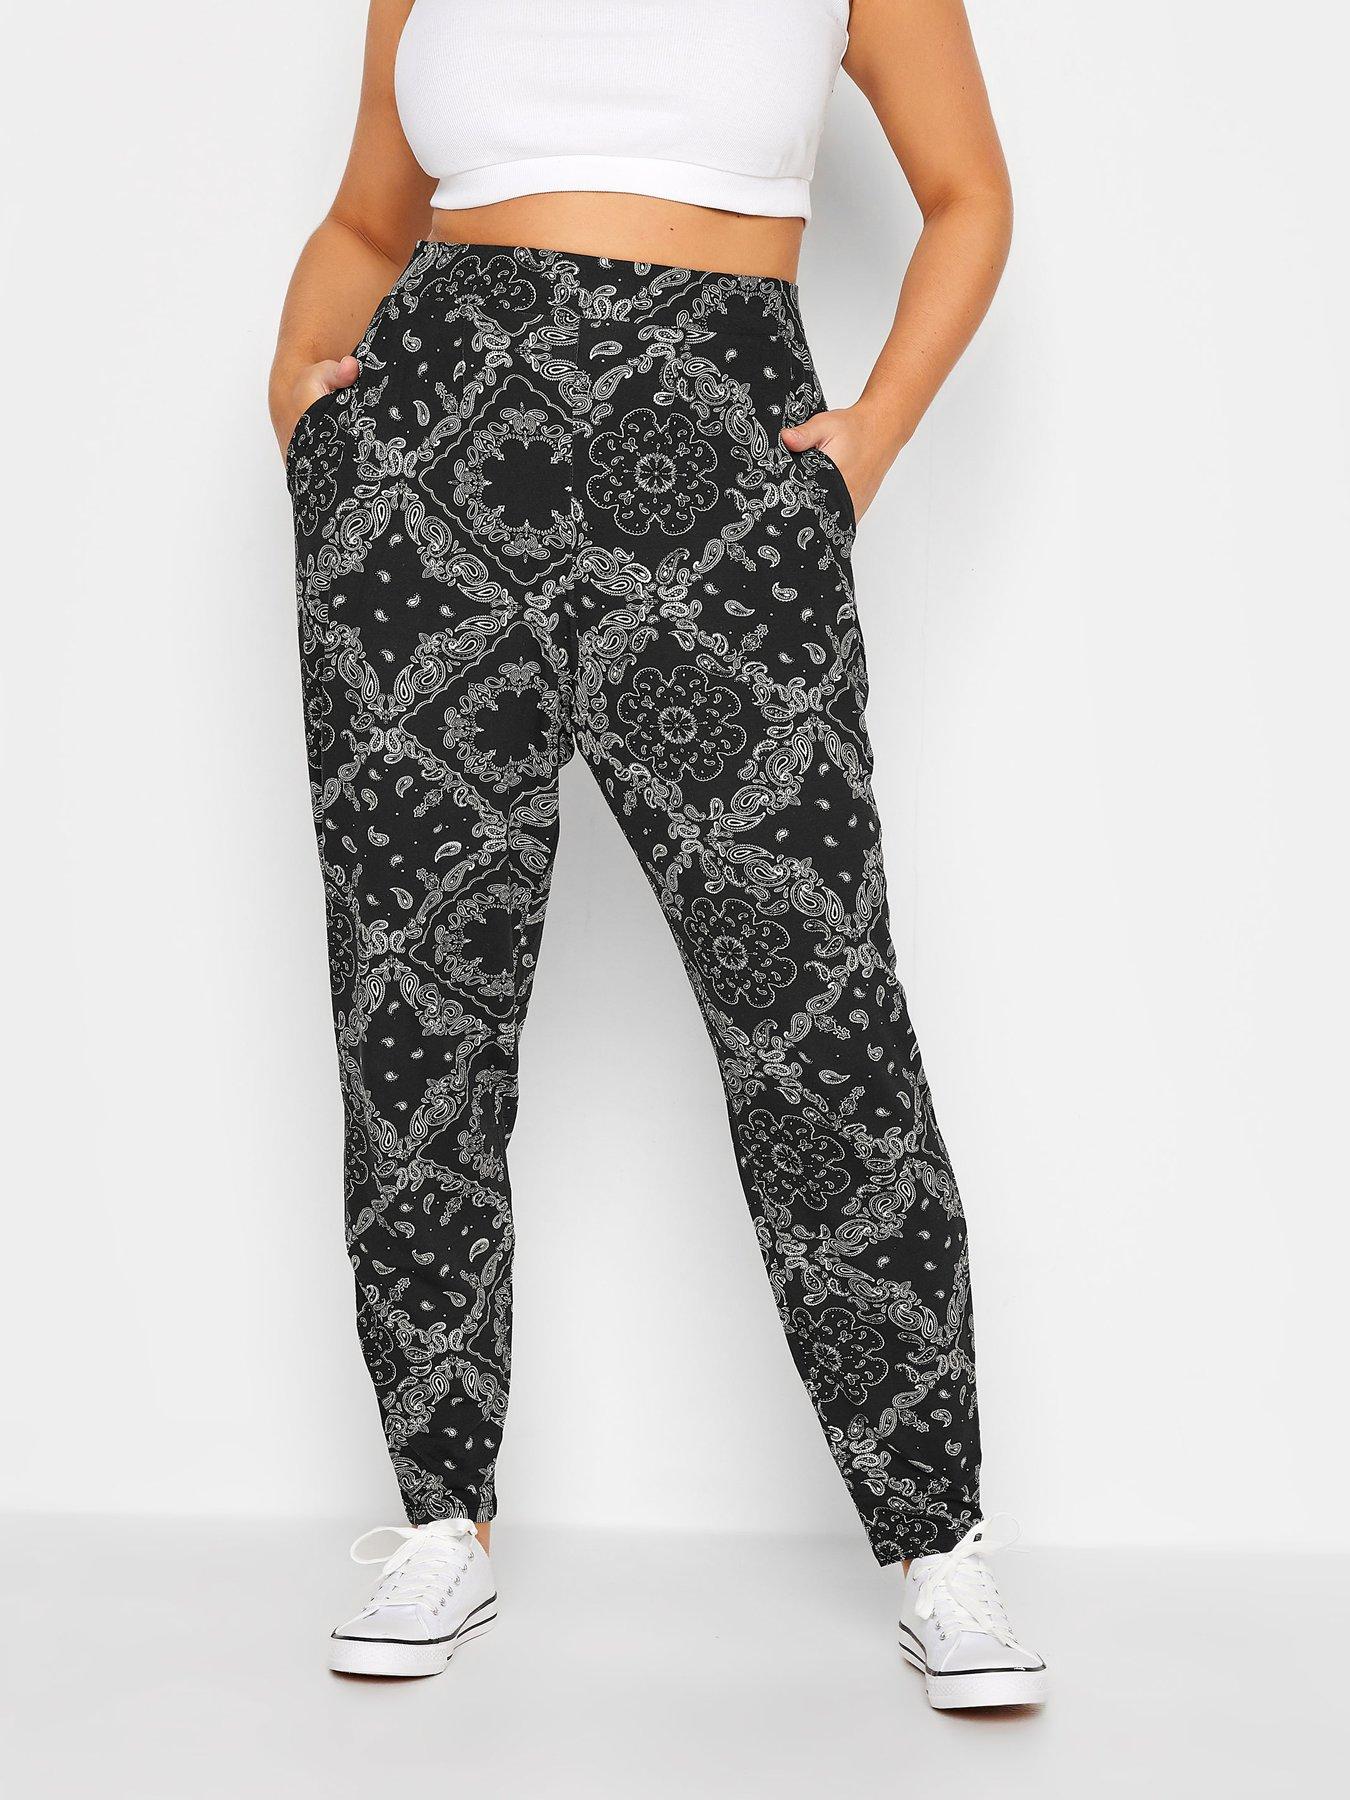 Floral Trousers, Womens Trousers